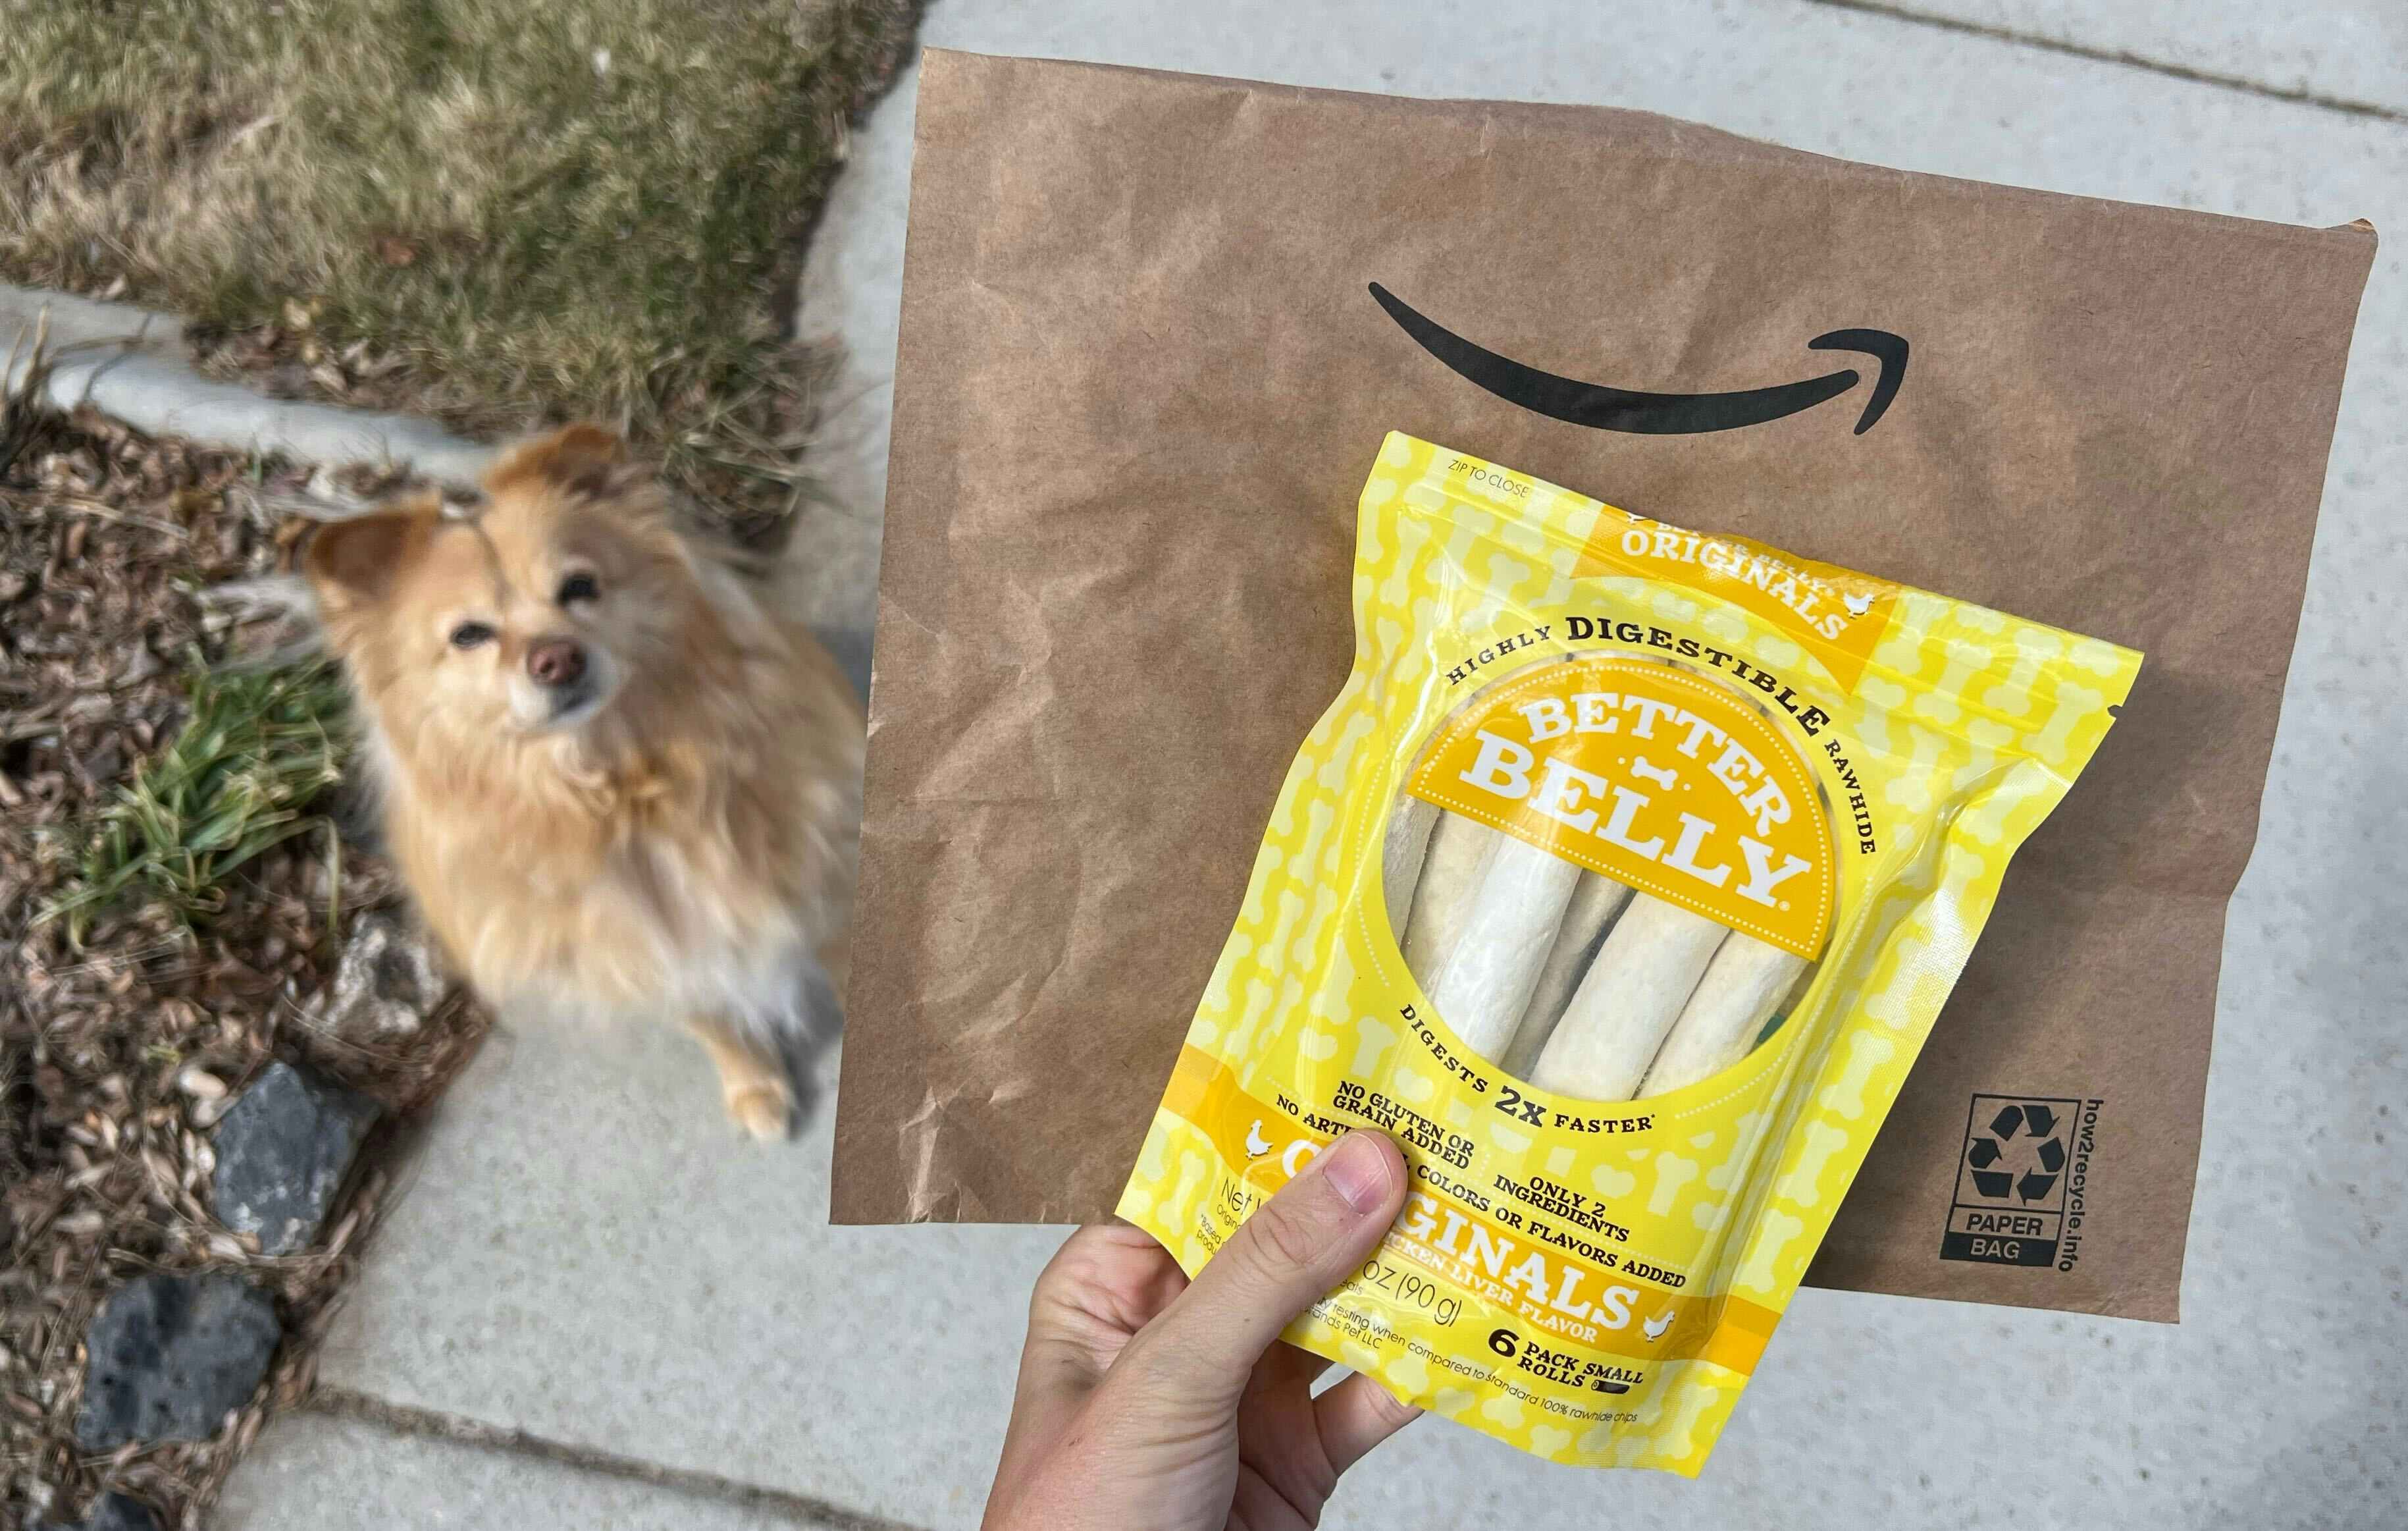 Better Belly Dog Chews, as Low as $3.68 During Amazon's Pet Day